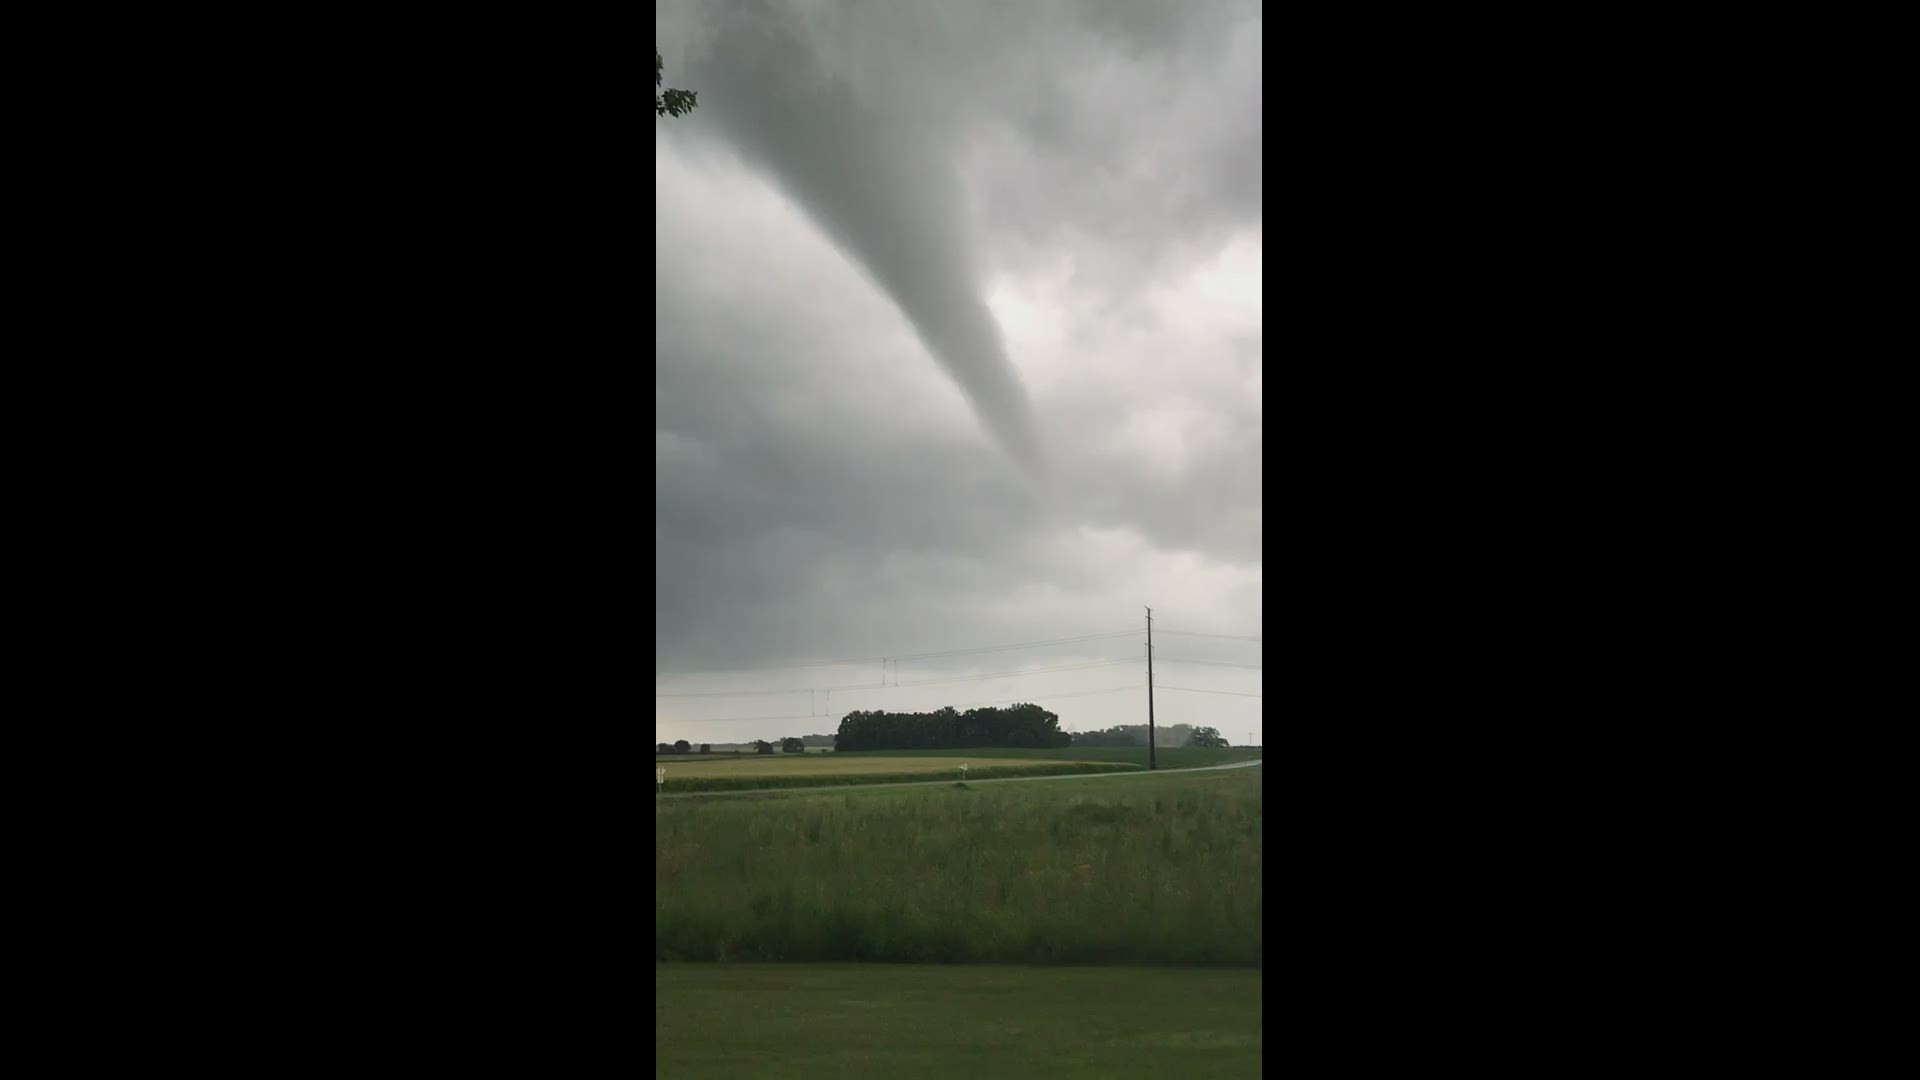 Viewer Robin Grewe captured this possible tornado touchdown near Gaylord, Minnesota on Saturday.